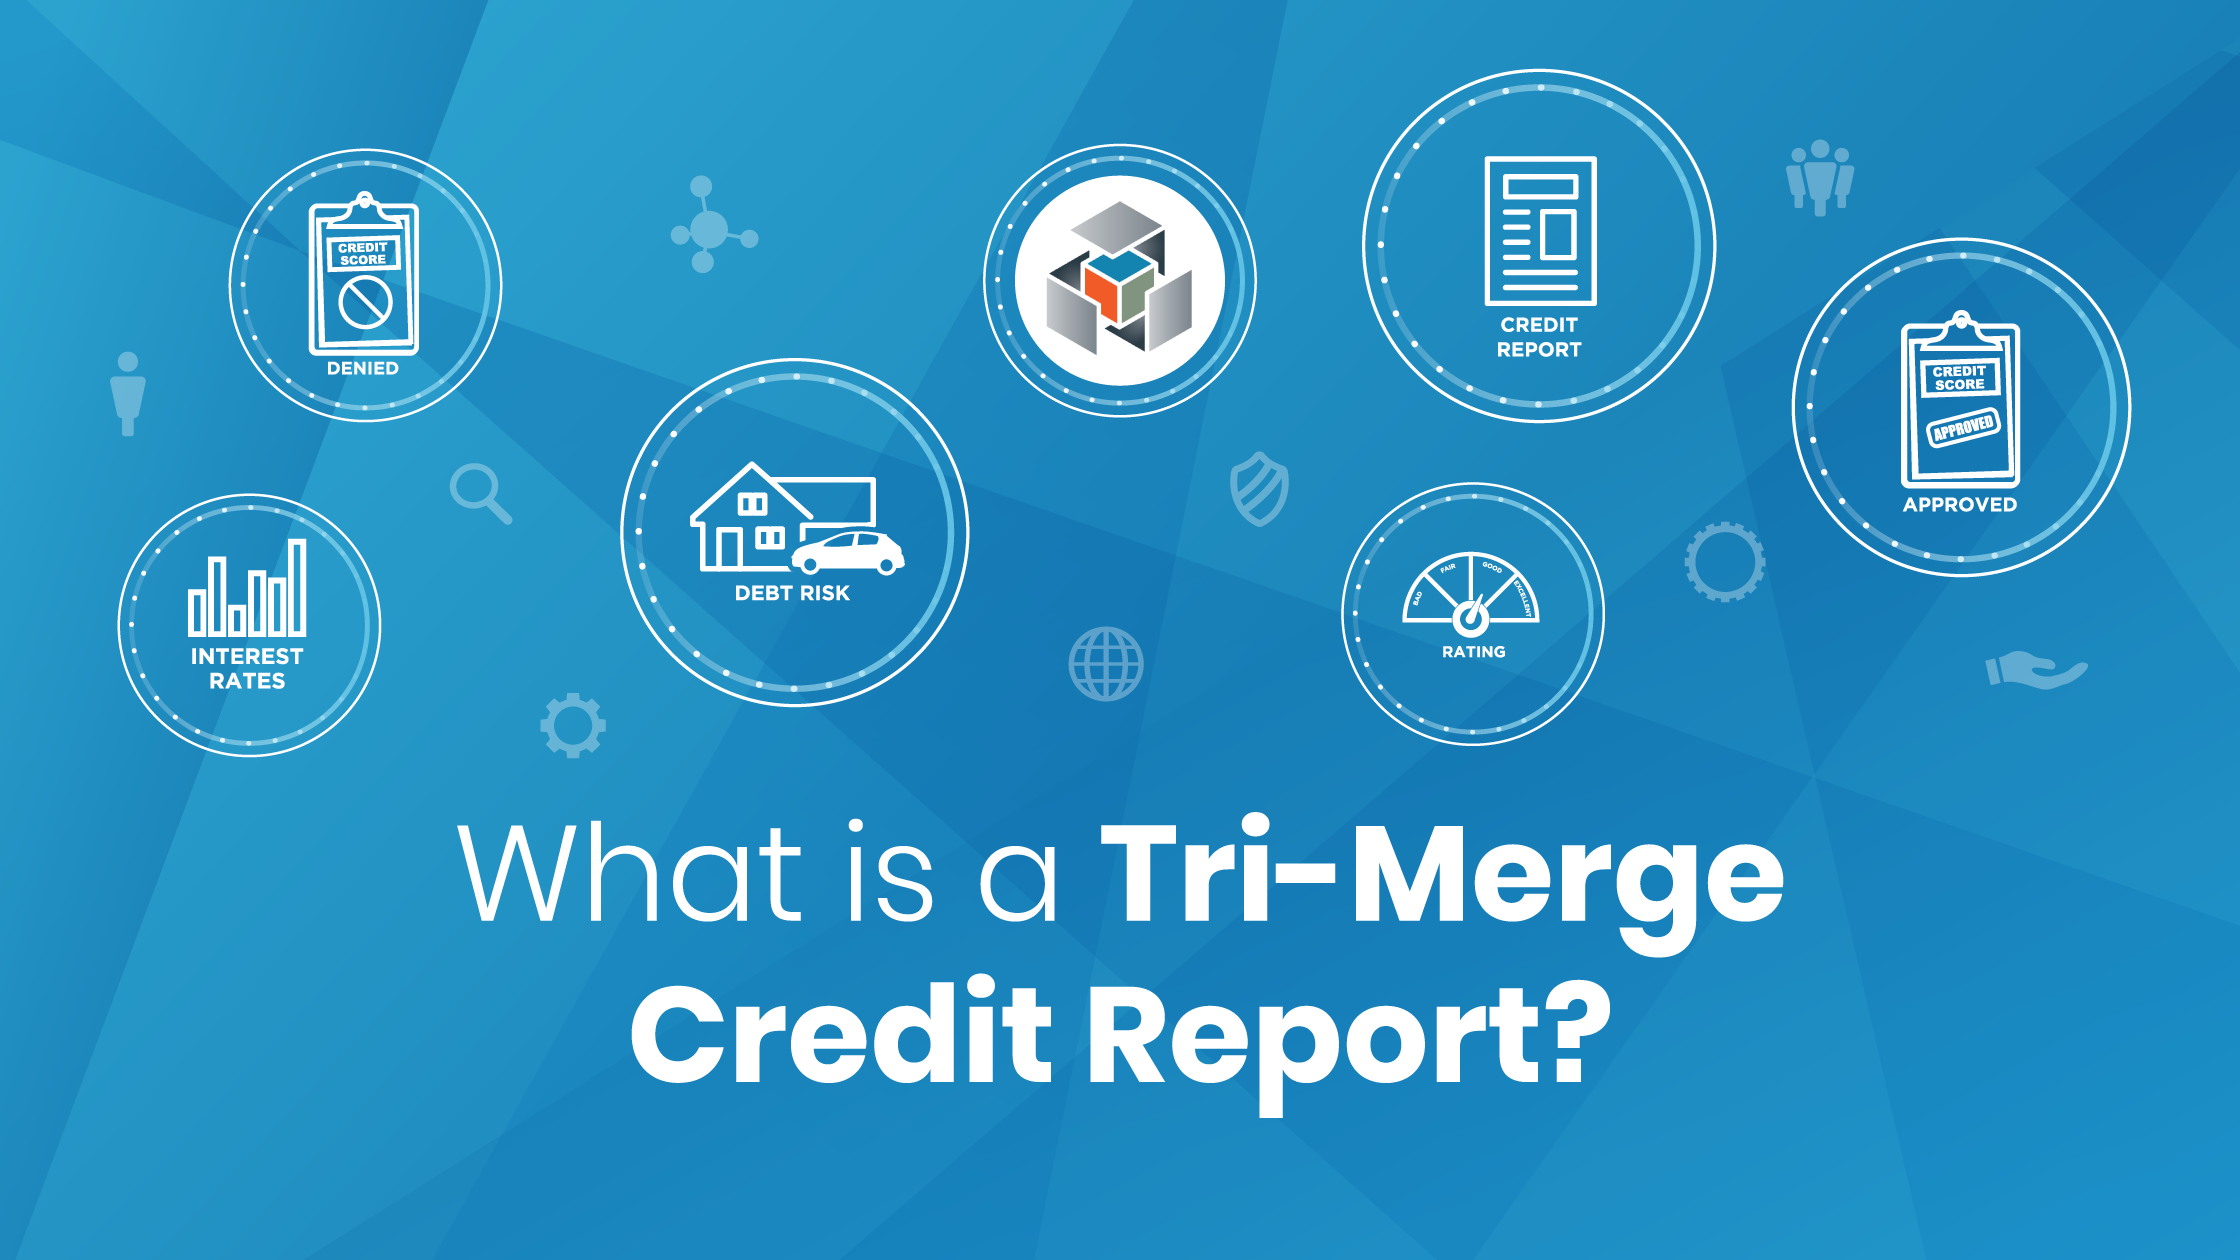 What is a Tri-Merge Credit Report?